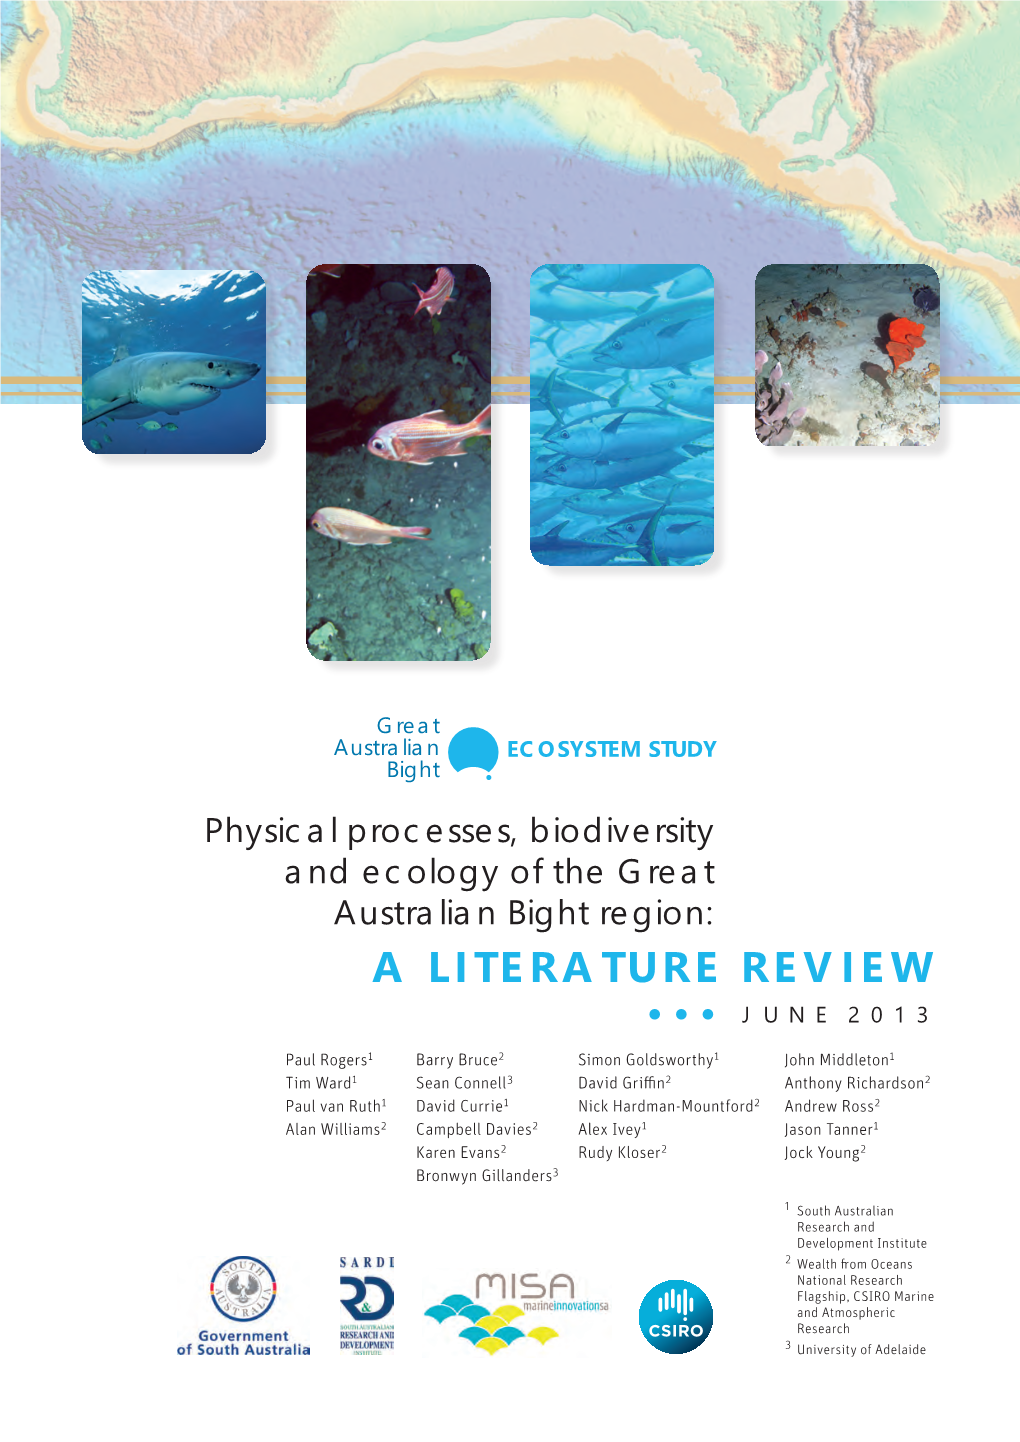 A Literature Review June 2013